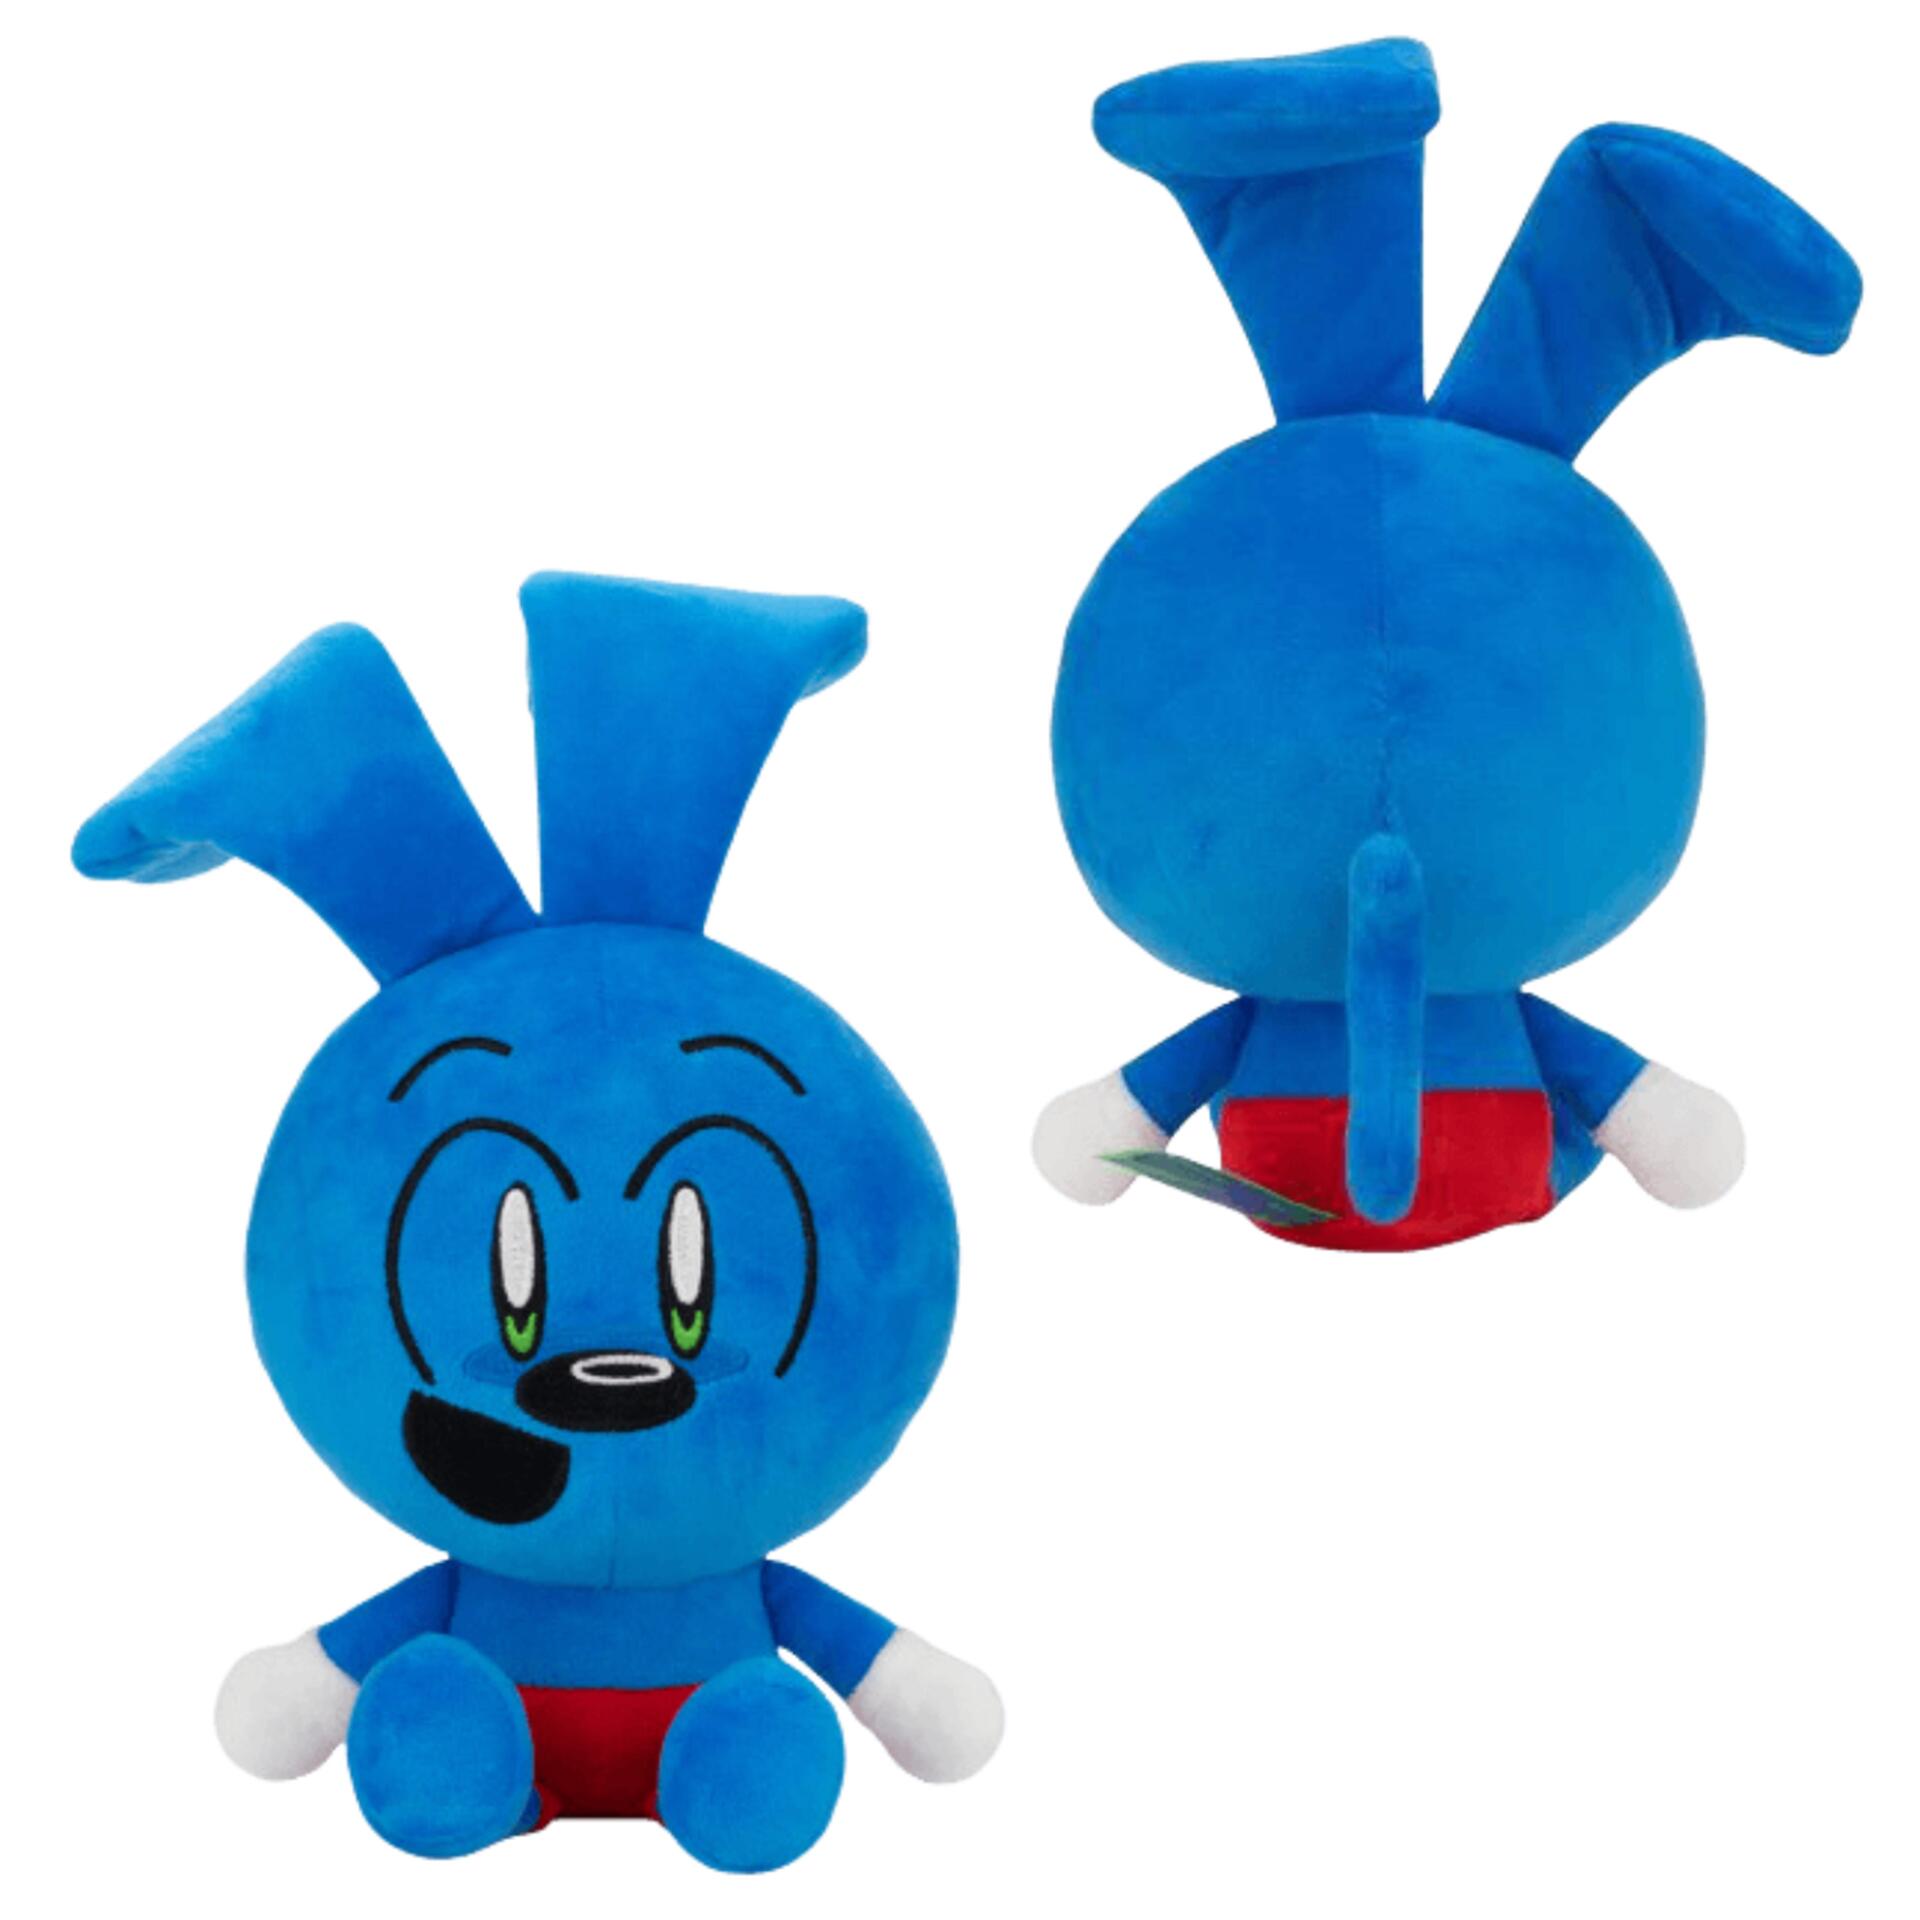 Bunzo Bunny Plushie Toy Cartoon Bunny Plush Poppy Realistic Monster Horror  Stuffed Figure Doll for Kids and Adults Birthday Gifts : : Toys